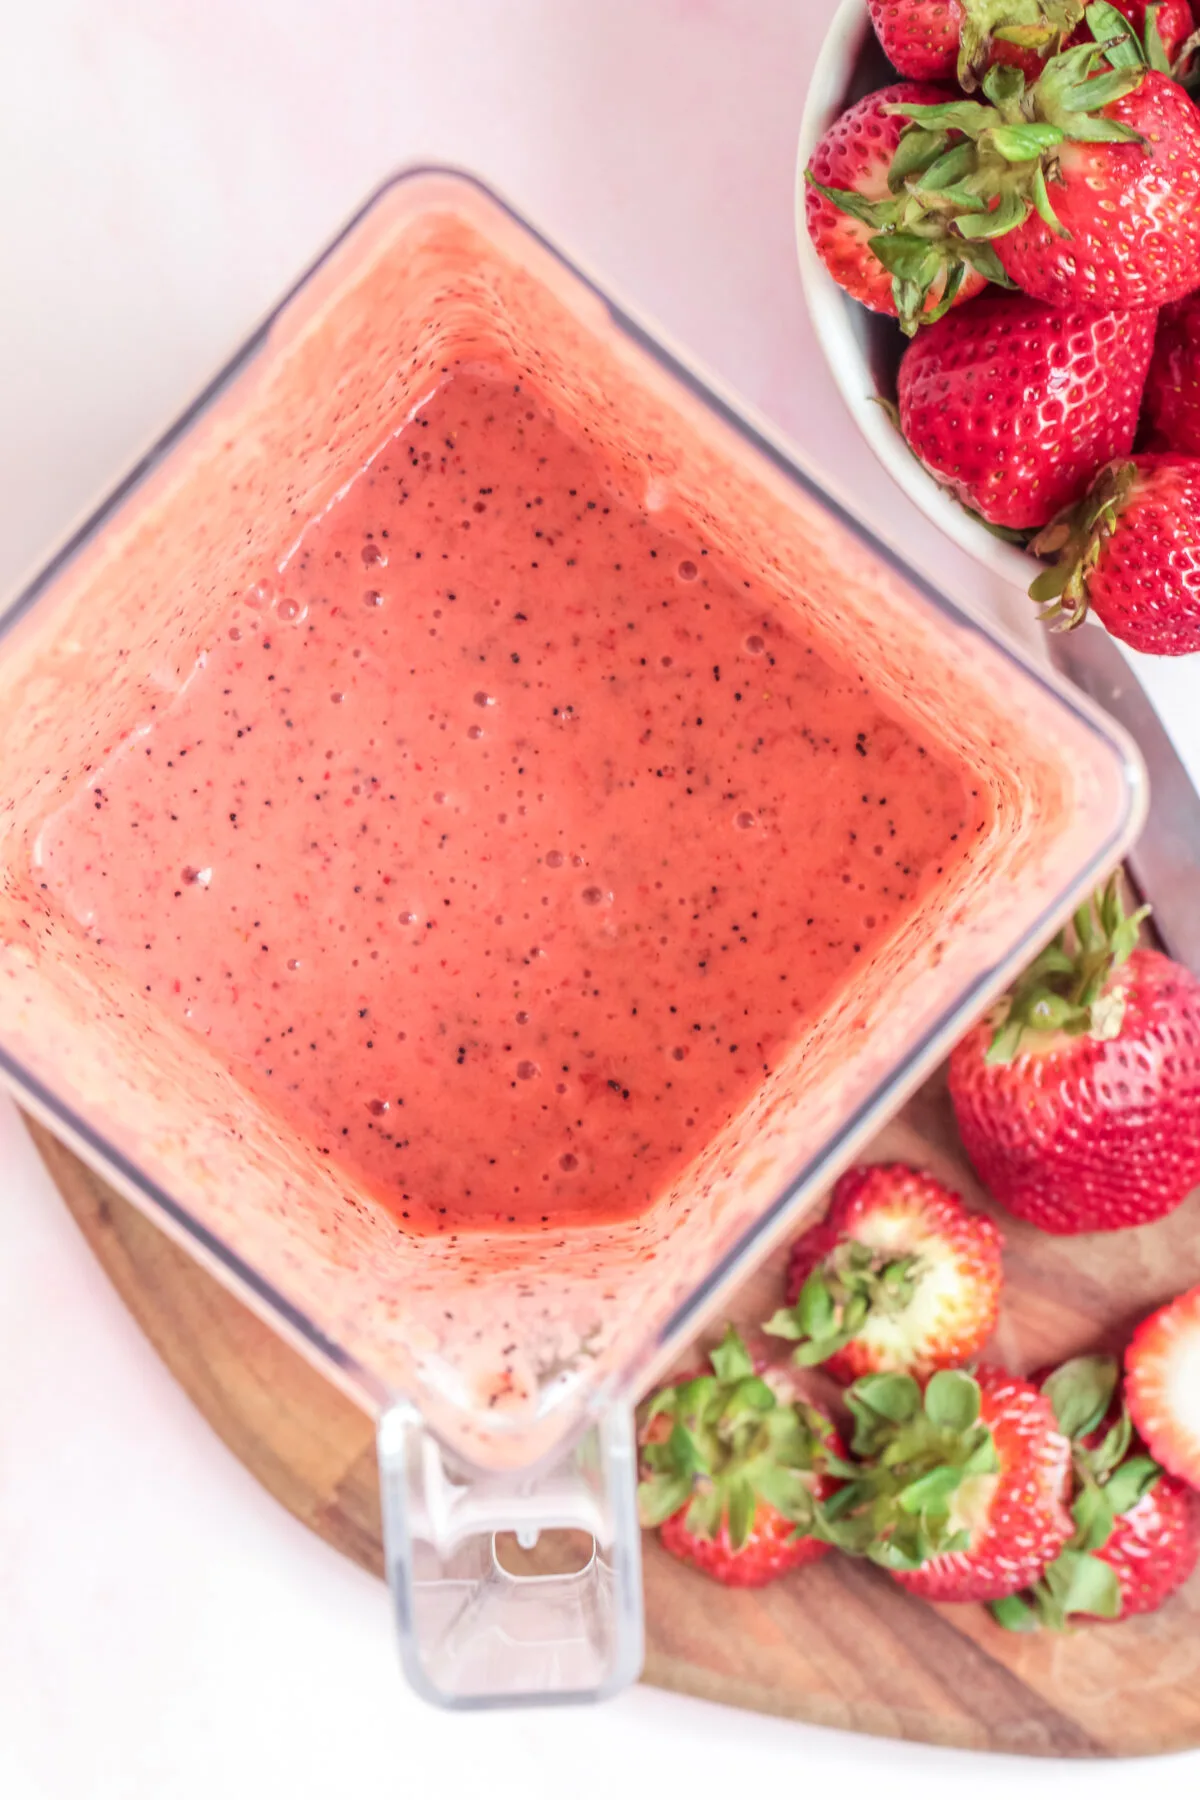 A quick, easy and tasty recipe for strawberry poppy seed salad dressing! Great full-bodied flavours that mix well with your favourite greens.